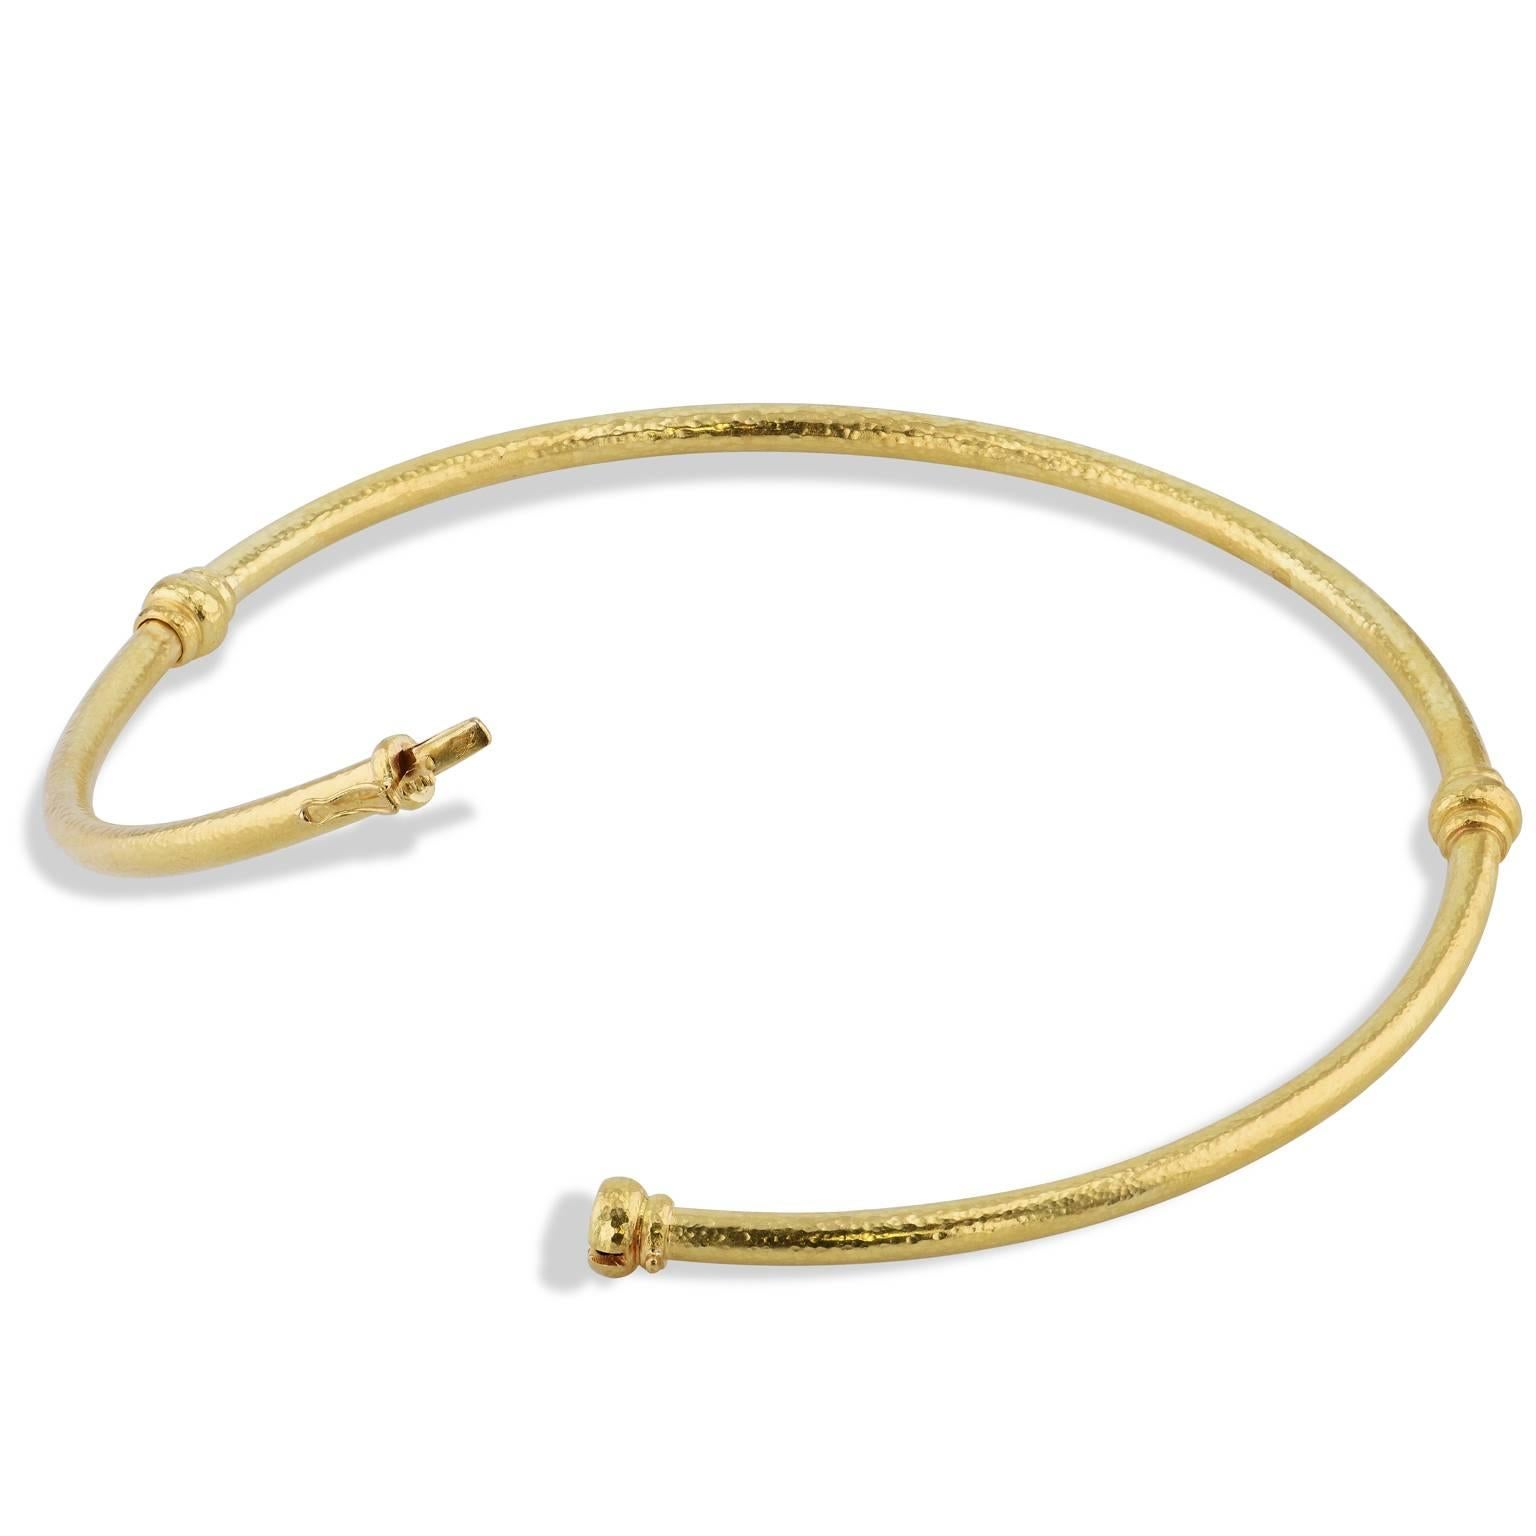 This previously loved 18 karat yellow gold Elizabeth Locke choker is simply stunning. This versatile piece is great for both day and night.